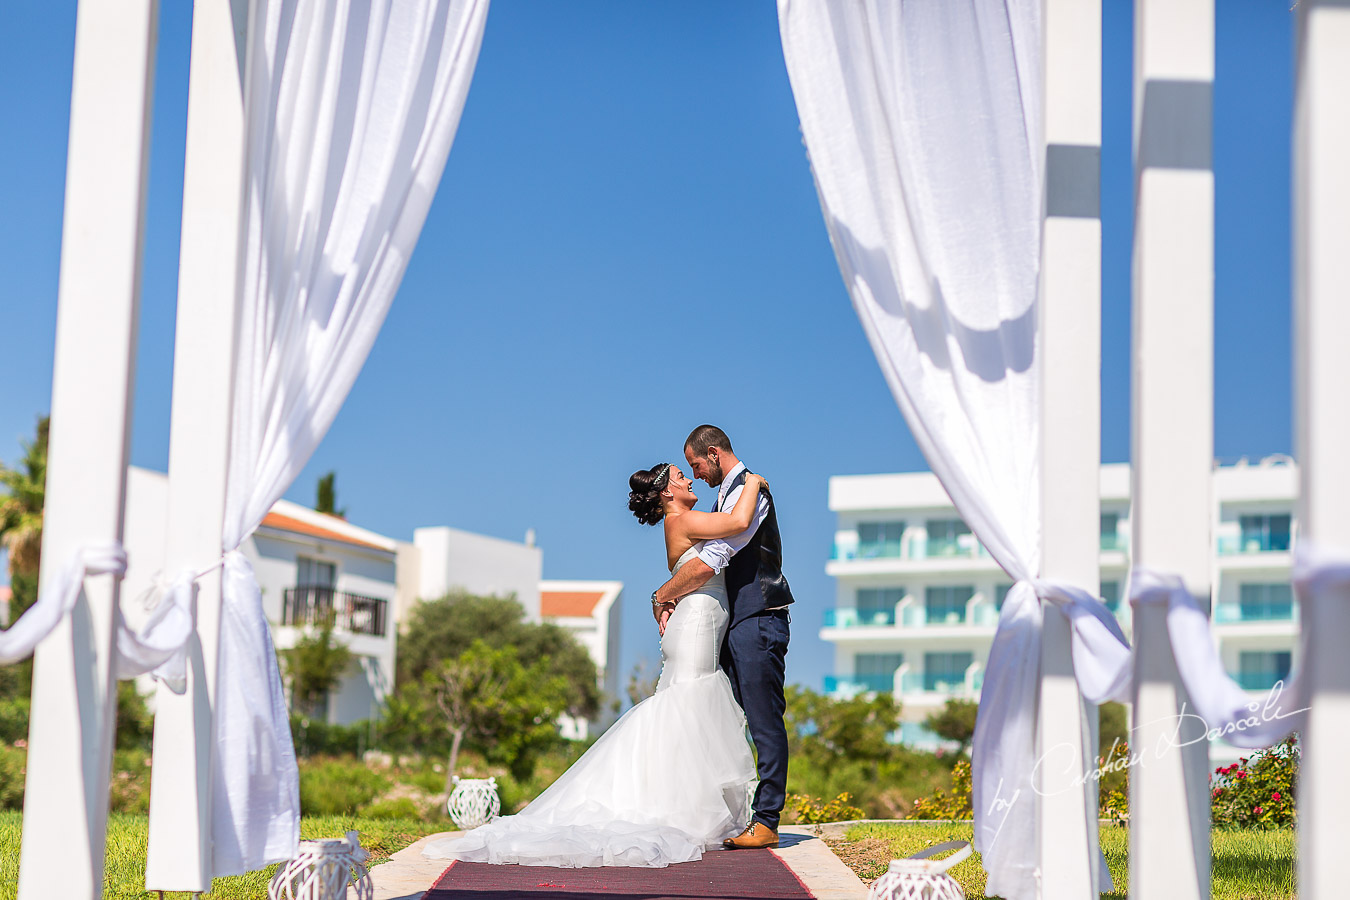 Beautiful Wedding photographed at King Evelton Hotel and Resort in Paphos, Cyprus.